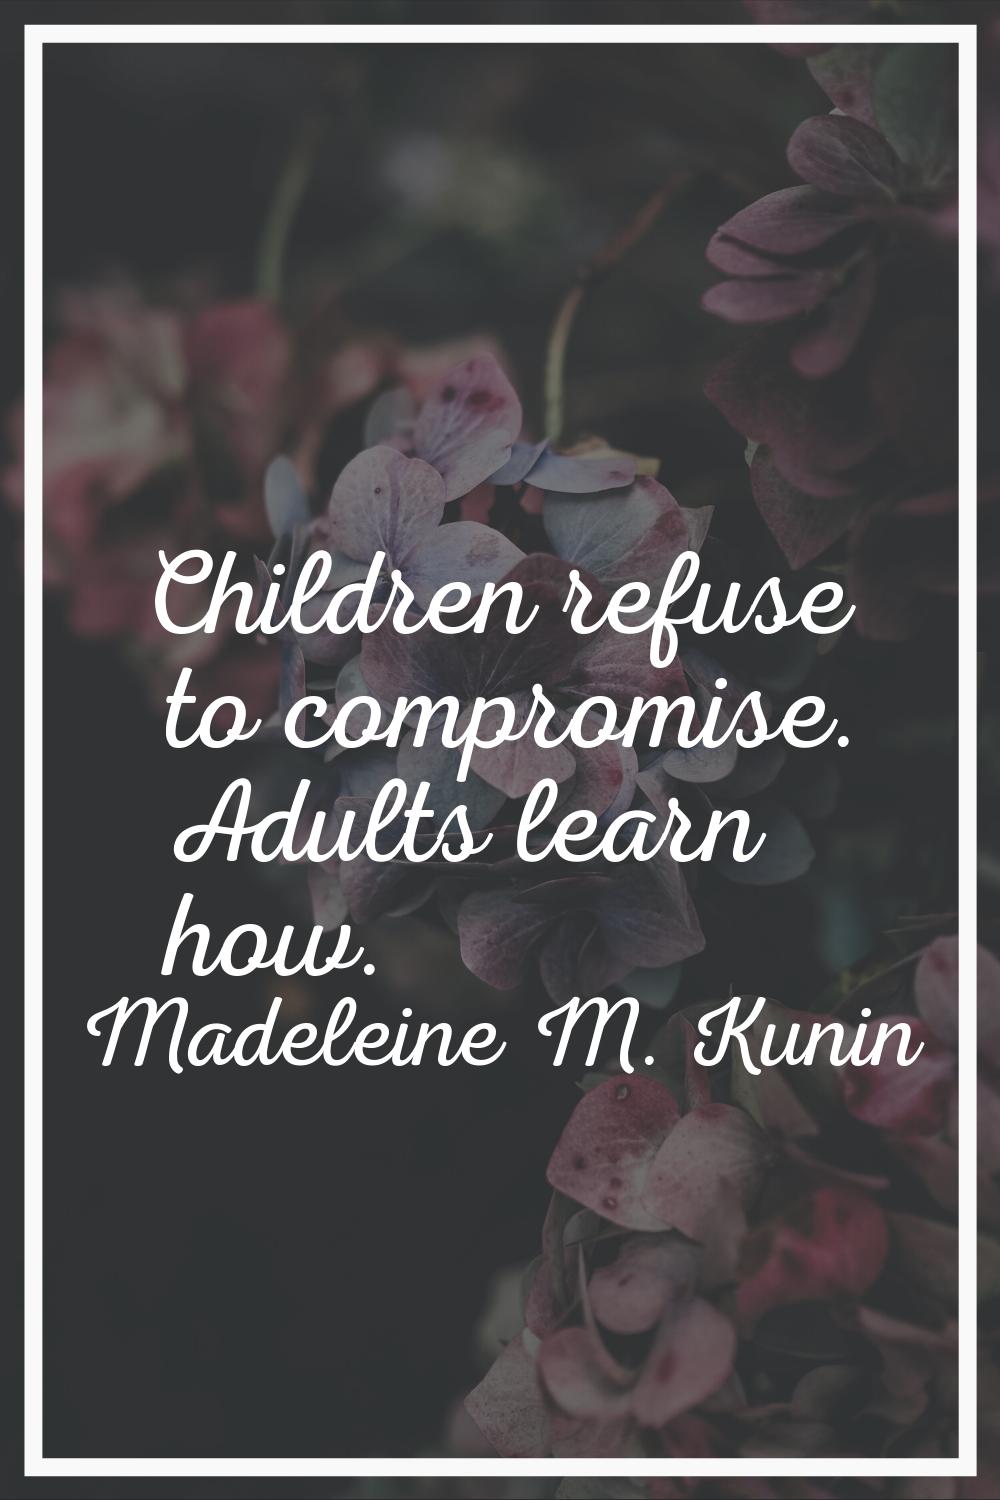 Children refuse to compromise. Adults learn how.